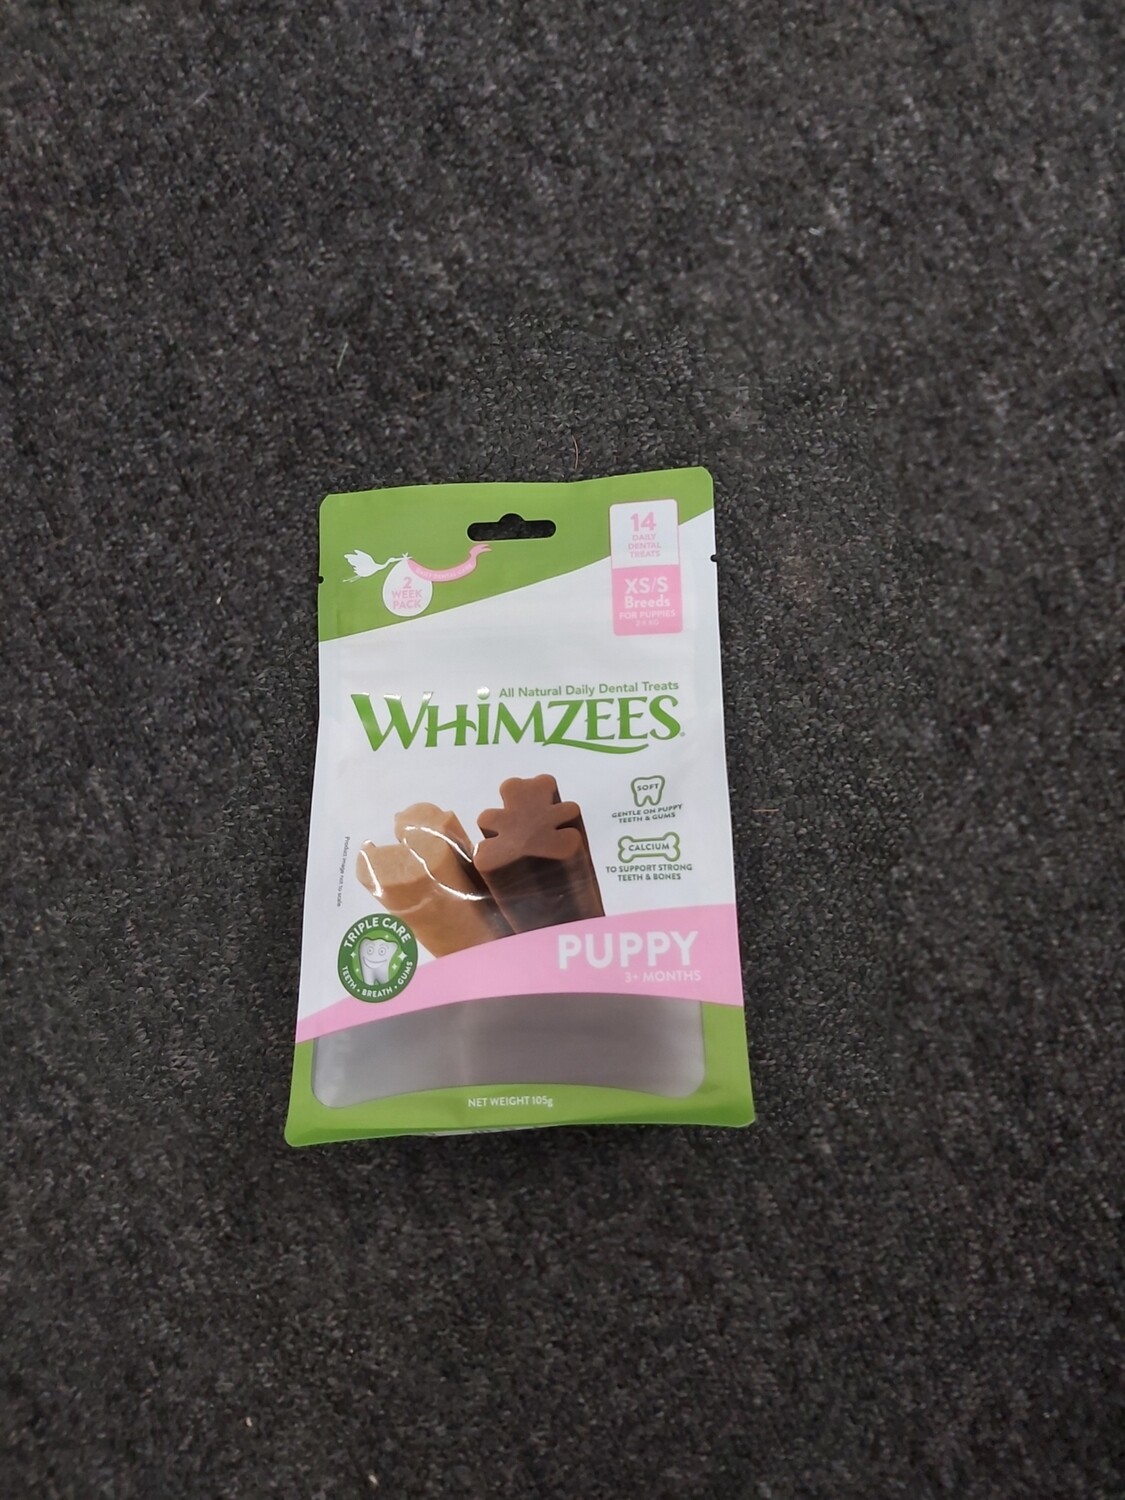 Whimzees Puppy XS/S 14 pack